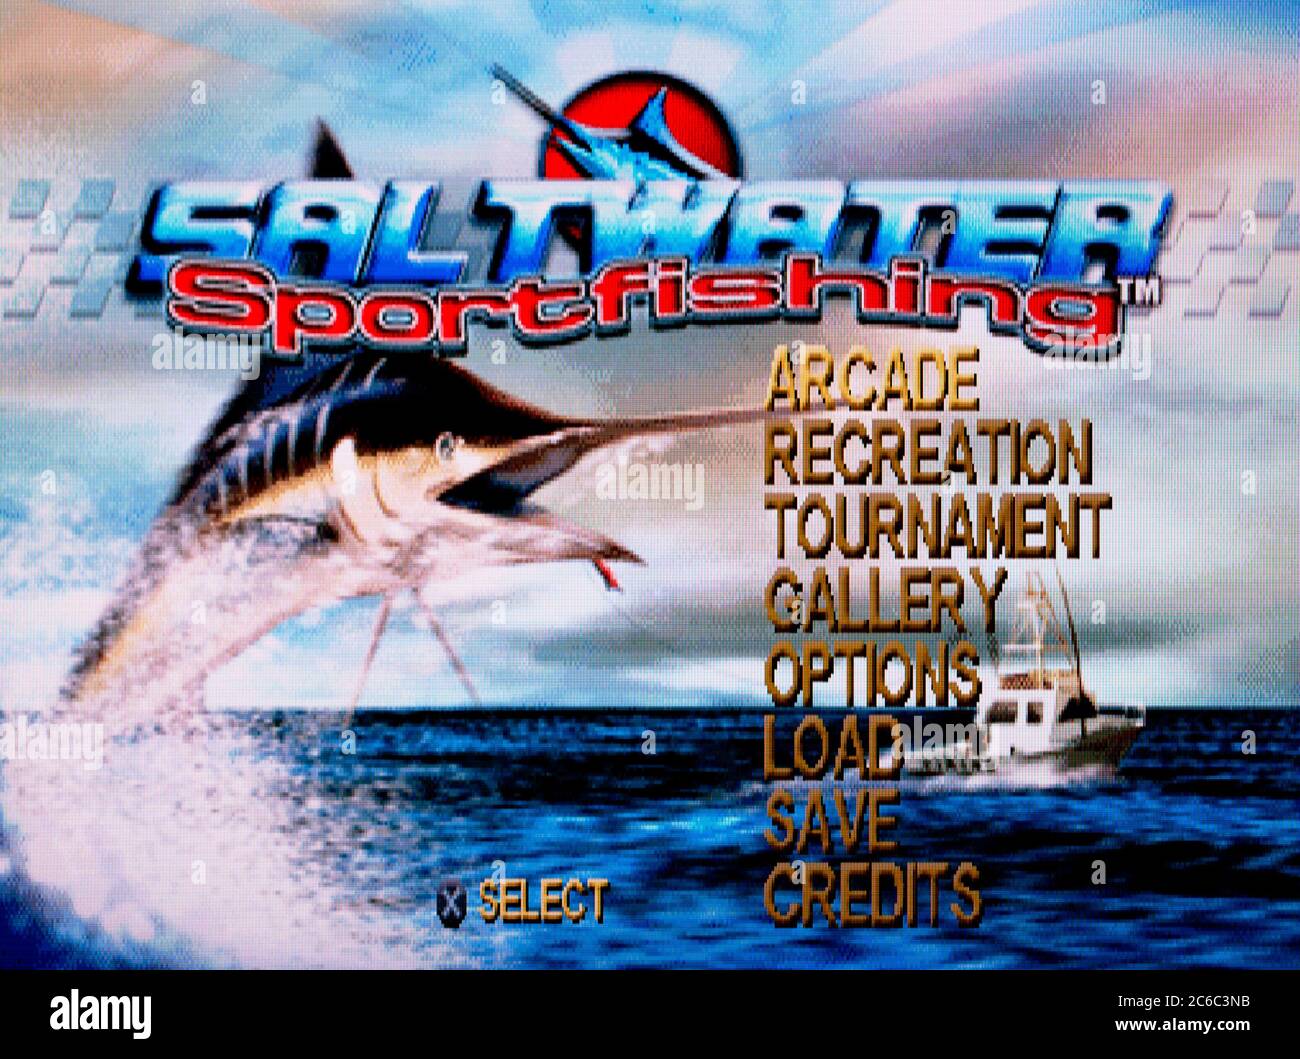 https://c8.alamy.com/comp/2C6C3NB/saltwater-sport-fishing-sony-playstation-1-ps1-psx-editorial-use-only-2C6C3NB.jpg